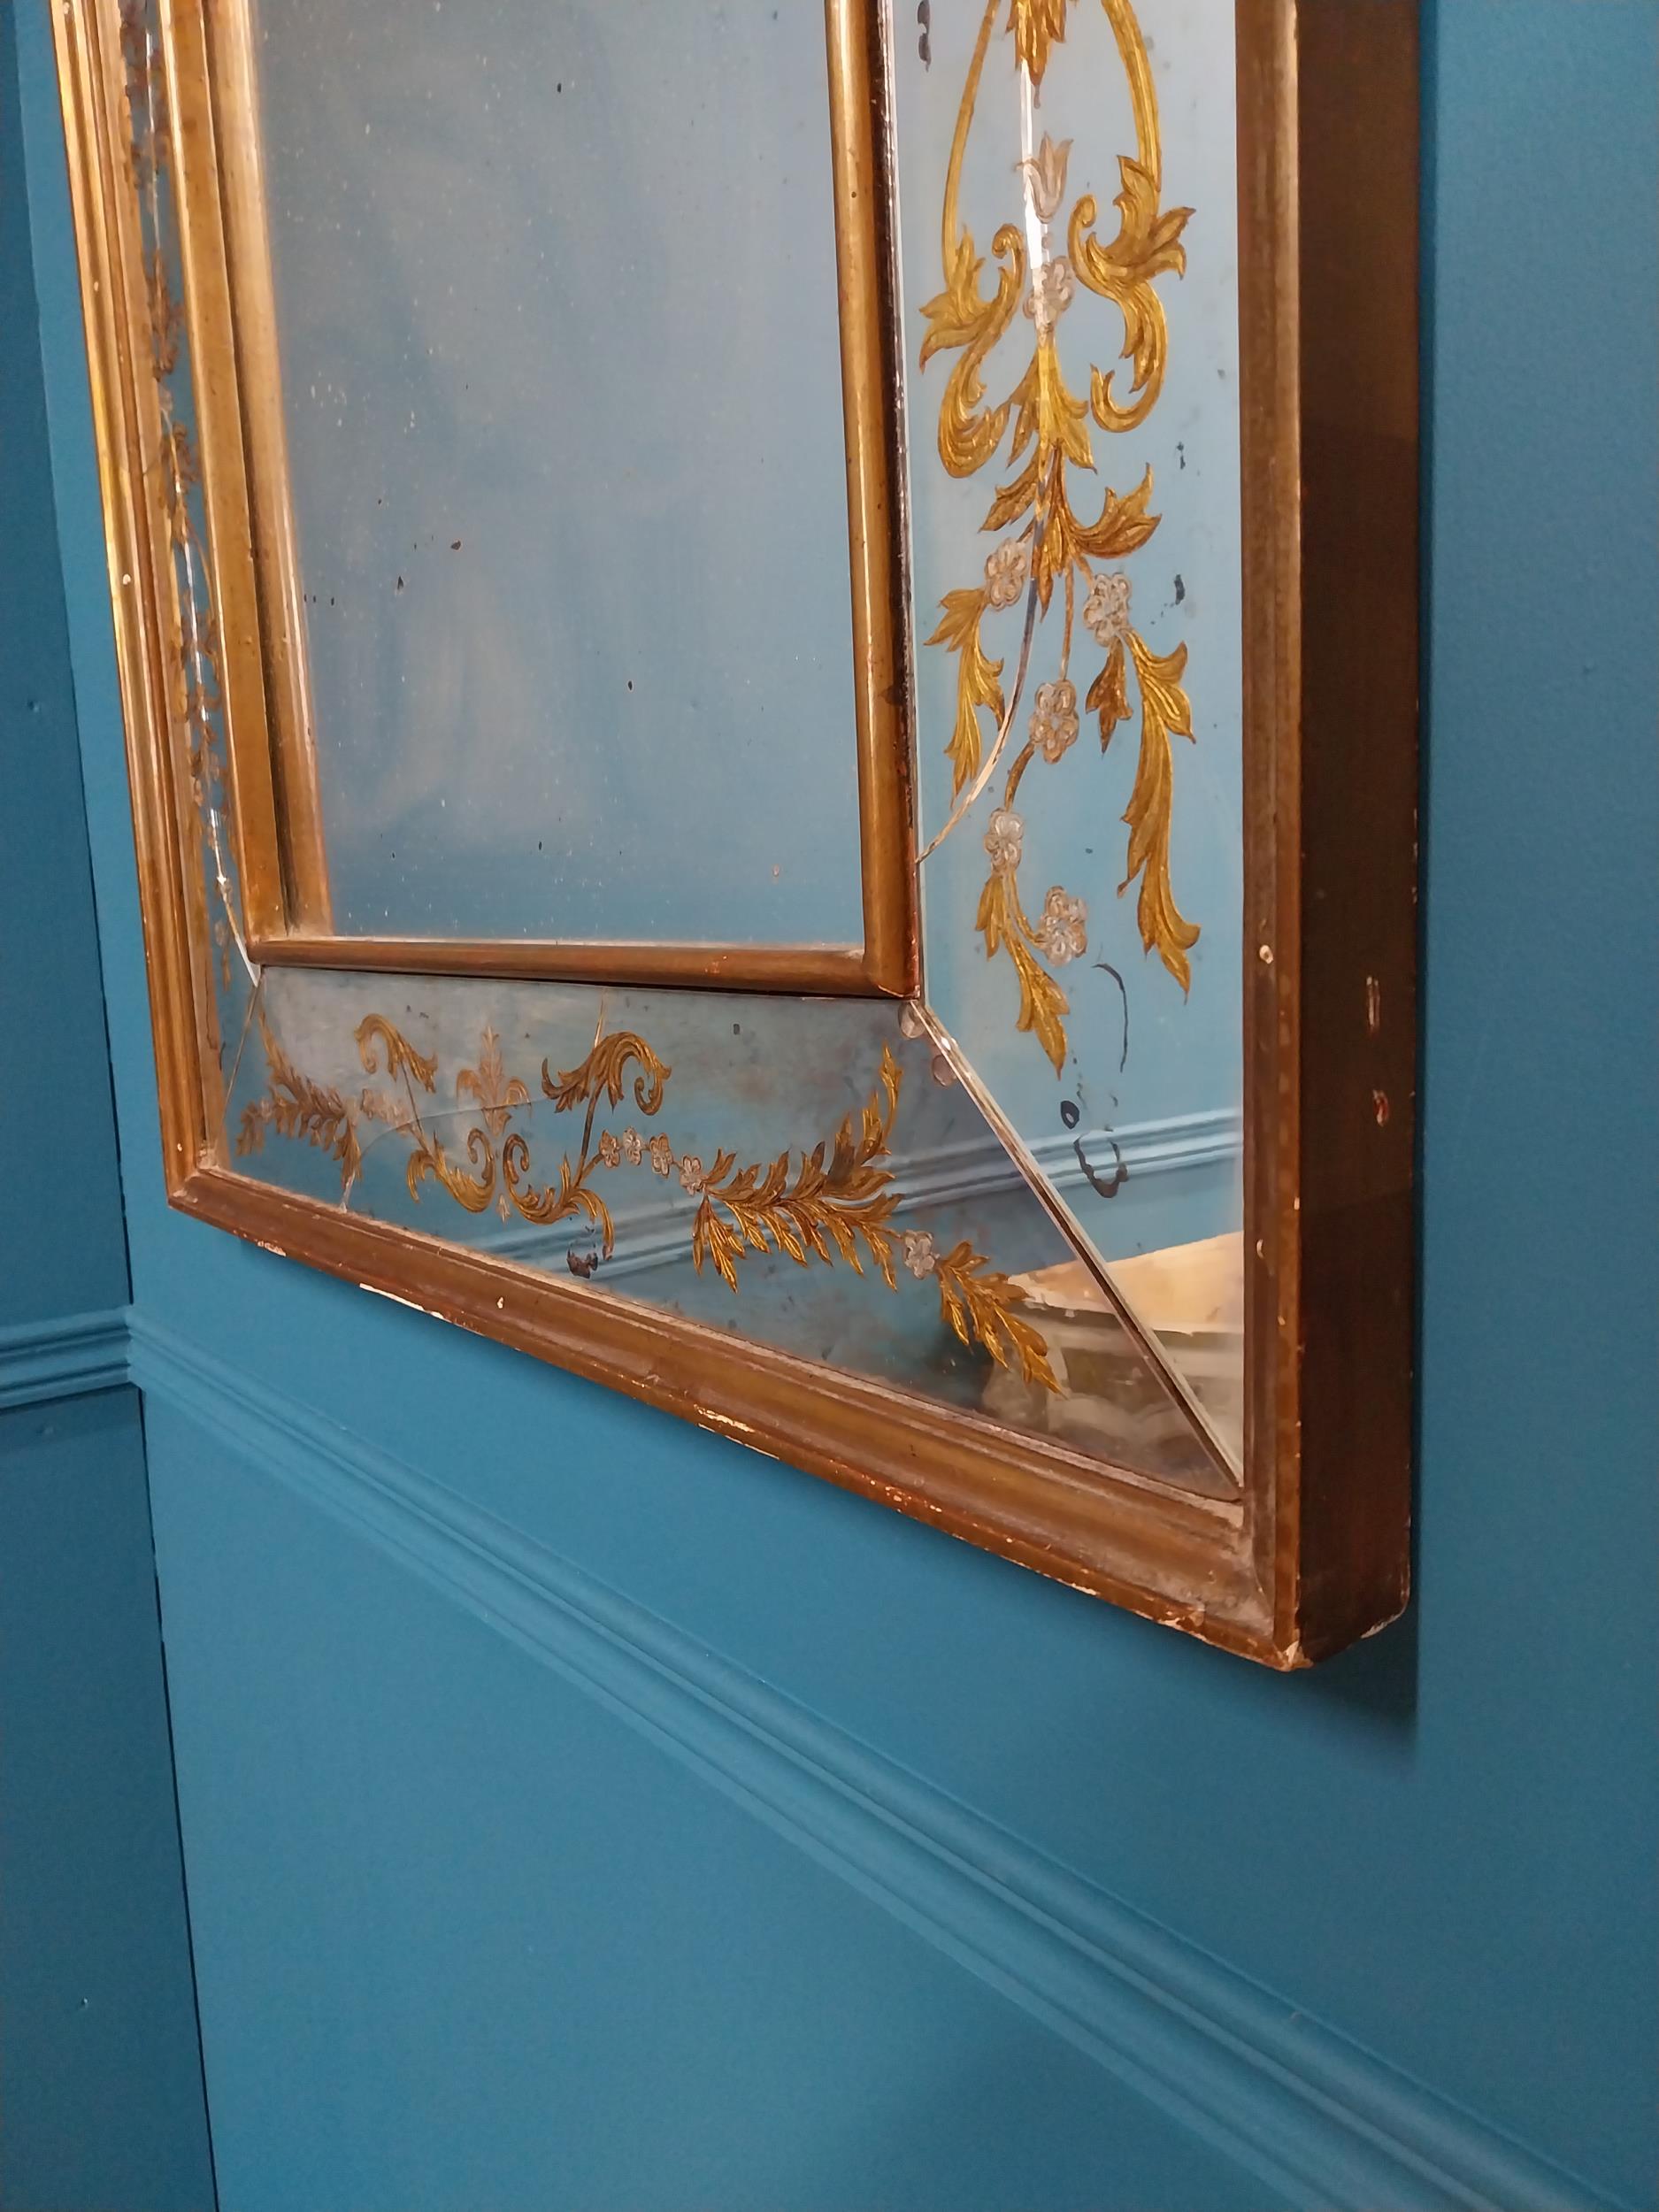 Early 20th C. Venetian mirror with gilded decoration {102 cm H x 70 cm W}. - Image 3 of 4